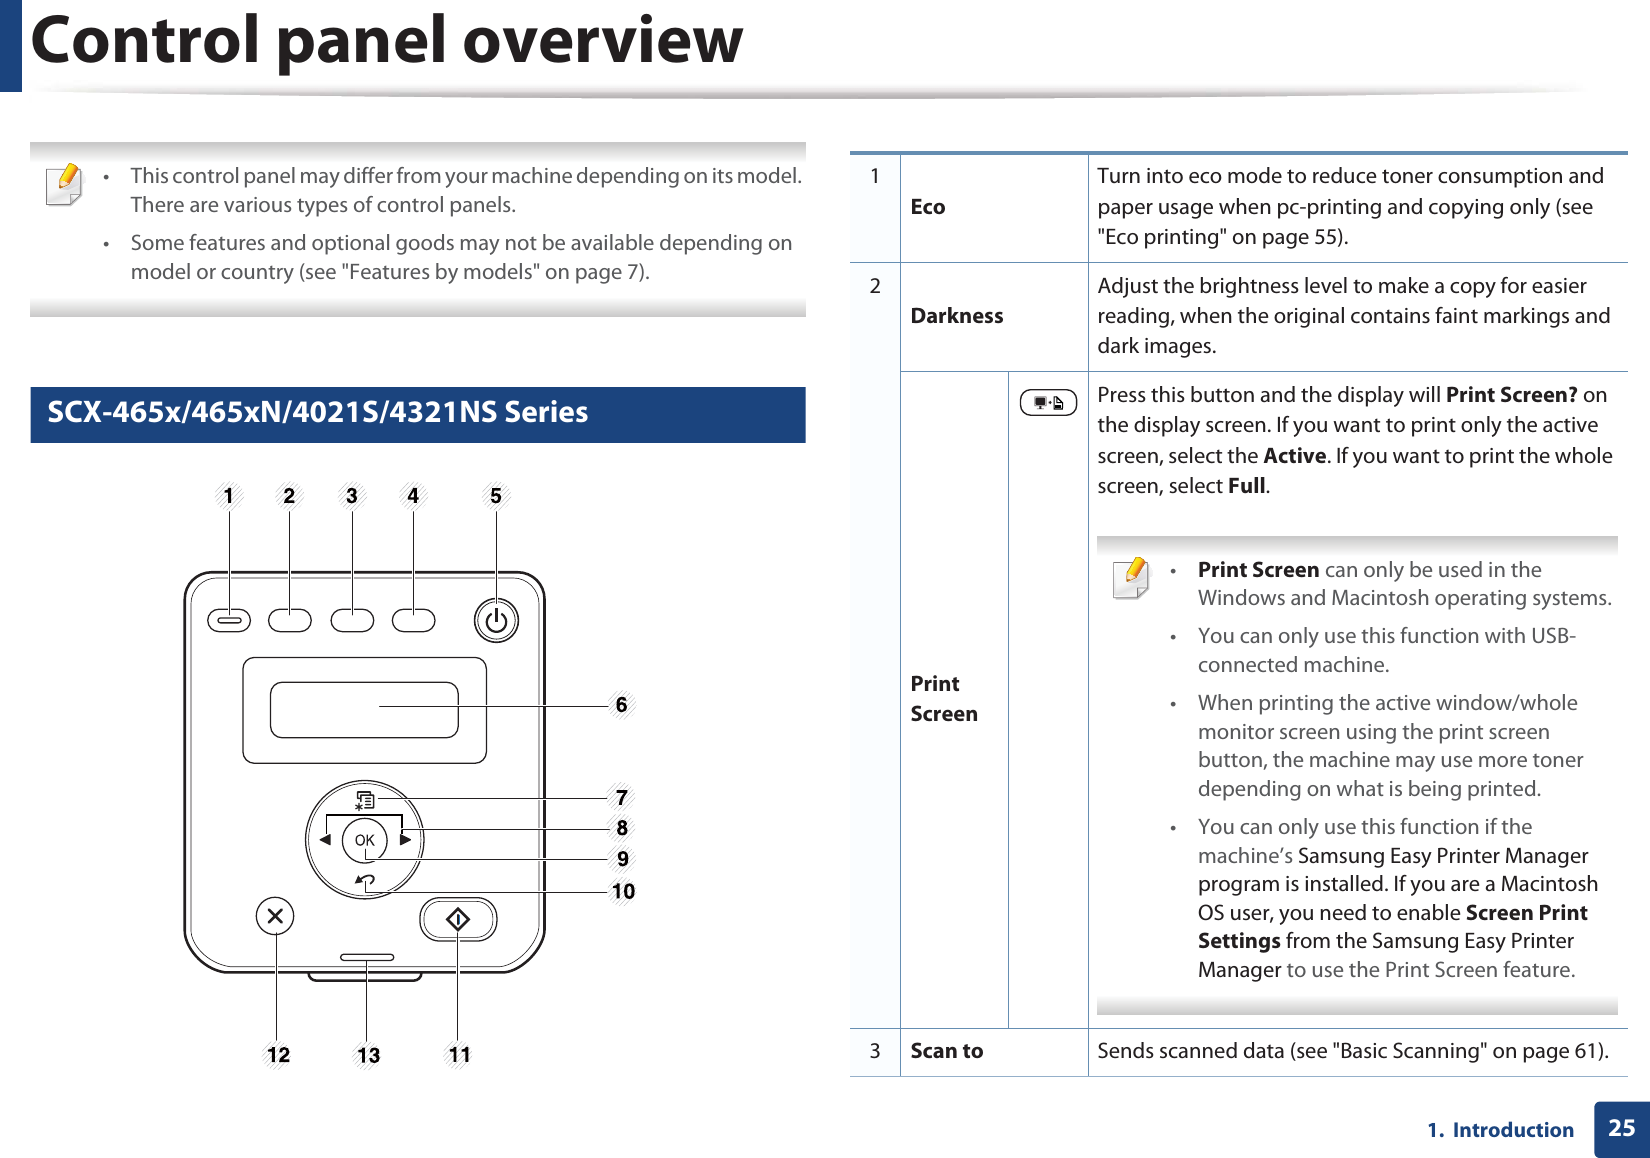 251.  IntroductionControl panel overview • This control panel may differ from your machine depending on its model. There are various types of control panels.• Some features and optional goods may not be available depending on model or country (see &quot;Features by models&quot; on page 7). 12 SCX-465x/465xN/4021S/4321NS Series1EcoTurn into eco mode to reduce toner consumption and paper usage when pc-printing and copying only (see &quot;Eco printing&quot; on page 55).2DarknessAdjust the brightness level to make a copy for easier reading, when the original contains faint markings and dark images.Print ScreenPress this button and the display will Print Screen? on the display screen. If you want to print only the active screen, select the Active. If you want to print the whole screen, select Full. •Print Screen can only be used in the Windows and Macintosh operating systems.• You can only use this function with USB-connected machine.• When printing the active window/whole monitor screen using the print screen button, the machine may use more toner depending on what is being printed.• You can only use this function if the machine’s Samsung Easy Printer Manager program is installed. If you are a Macintosh OS user, you need to enable Screen Print Settings from the Samsung Easy Printer Manager to use the Print Screen feature. 3Scan to Sends scanned data (see &quot;Basic Scanning&quot; on page 61). 